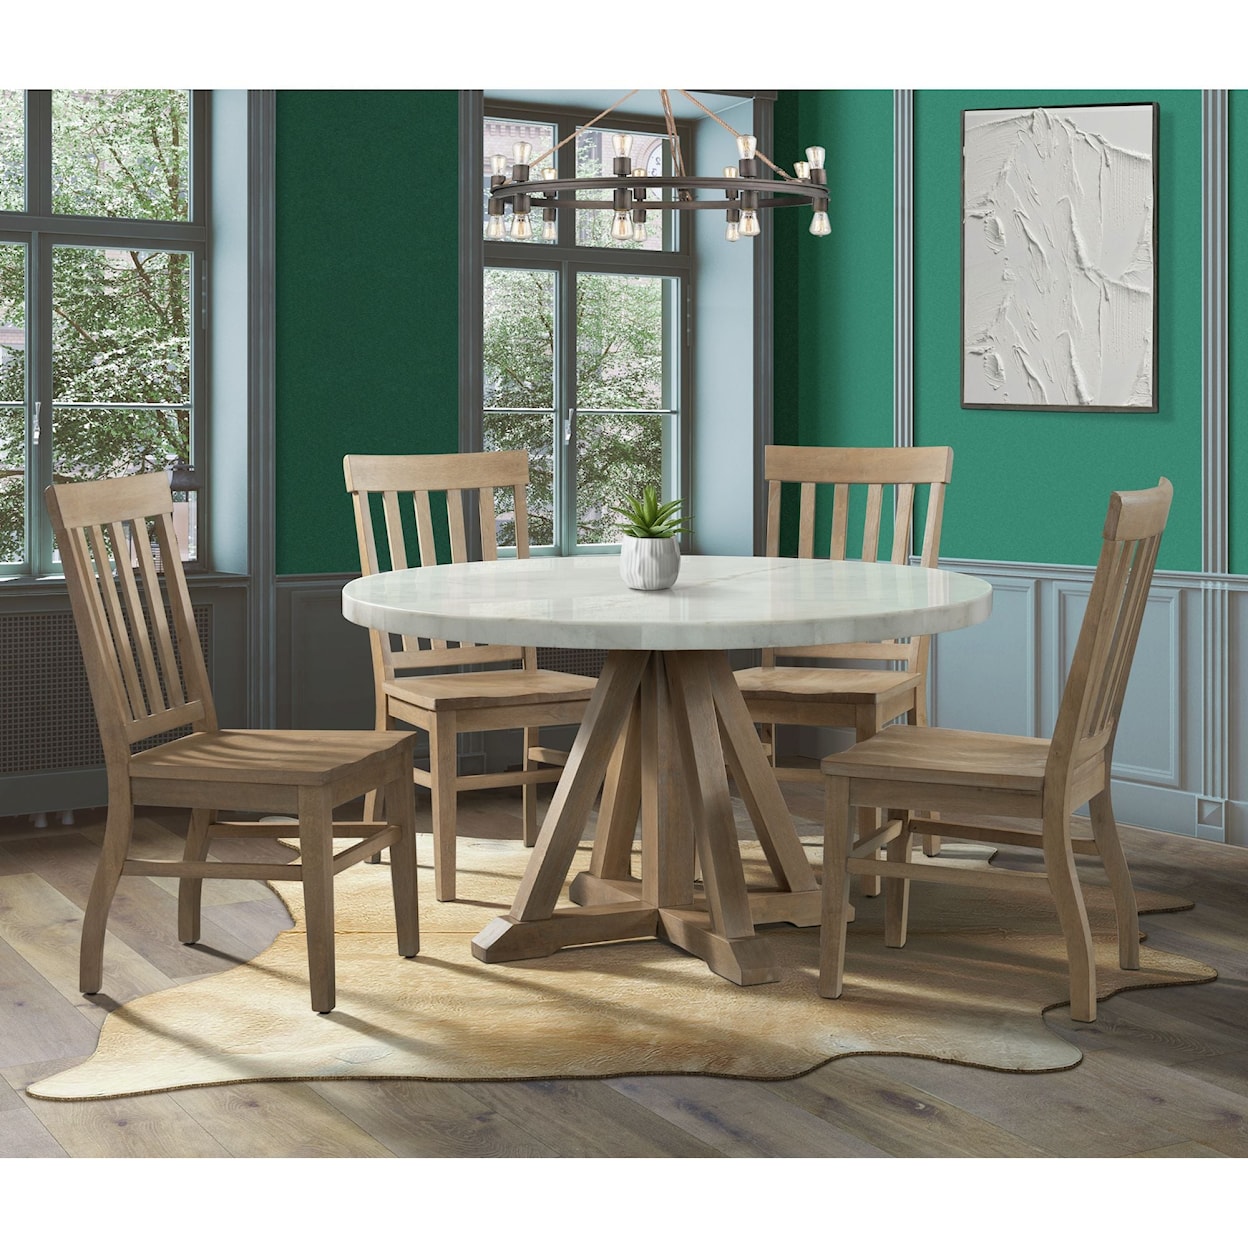 Elements International Lakeview Dining Room Set